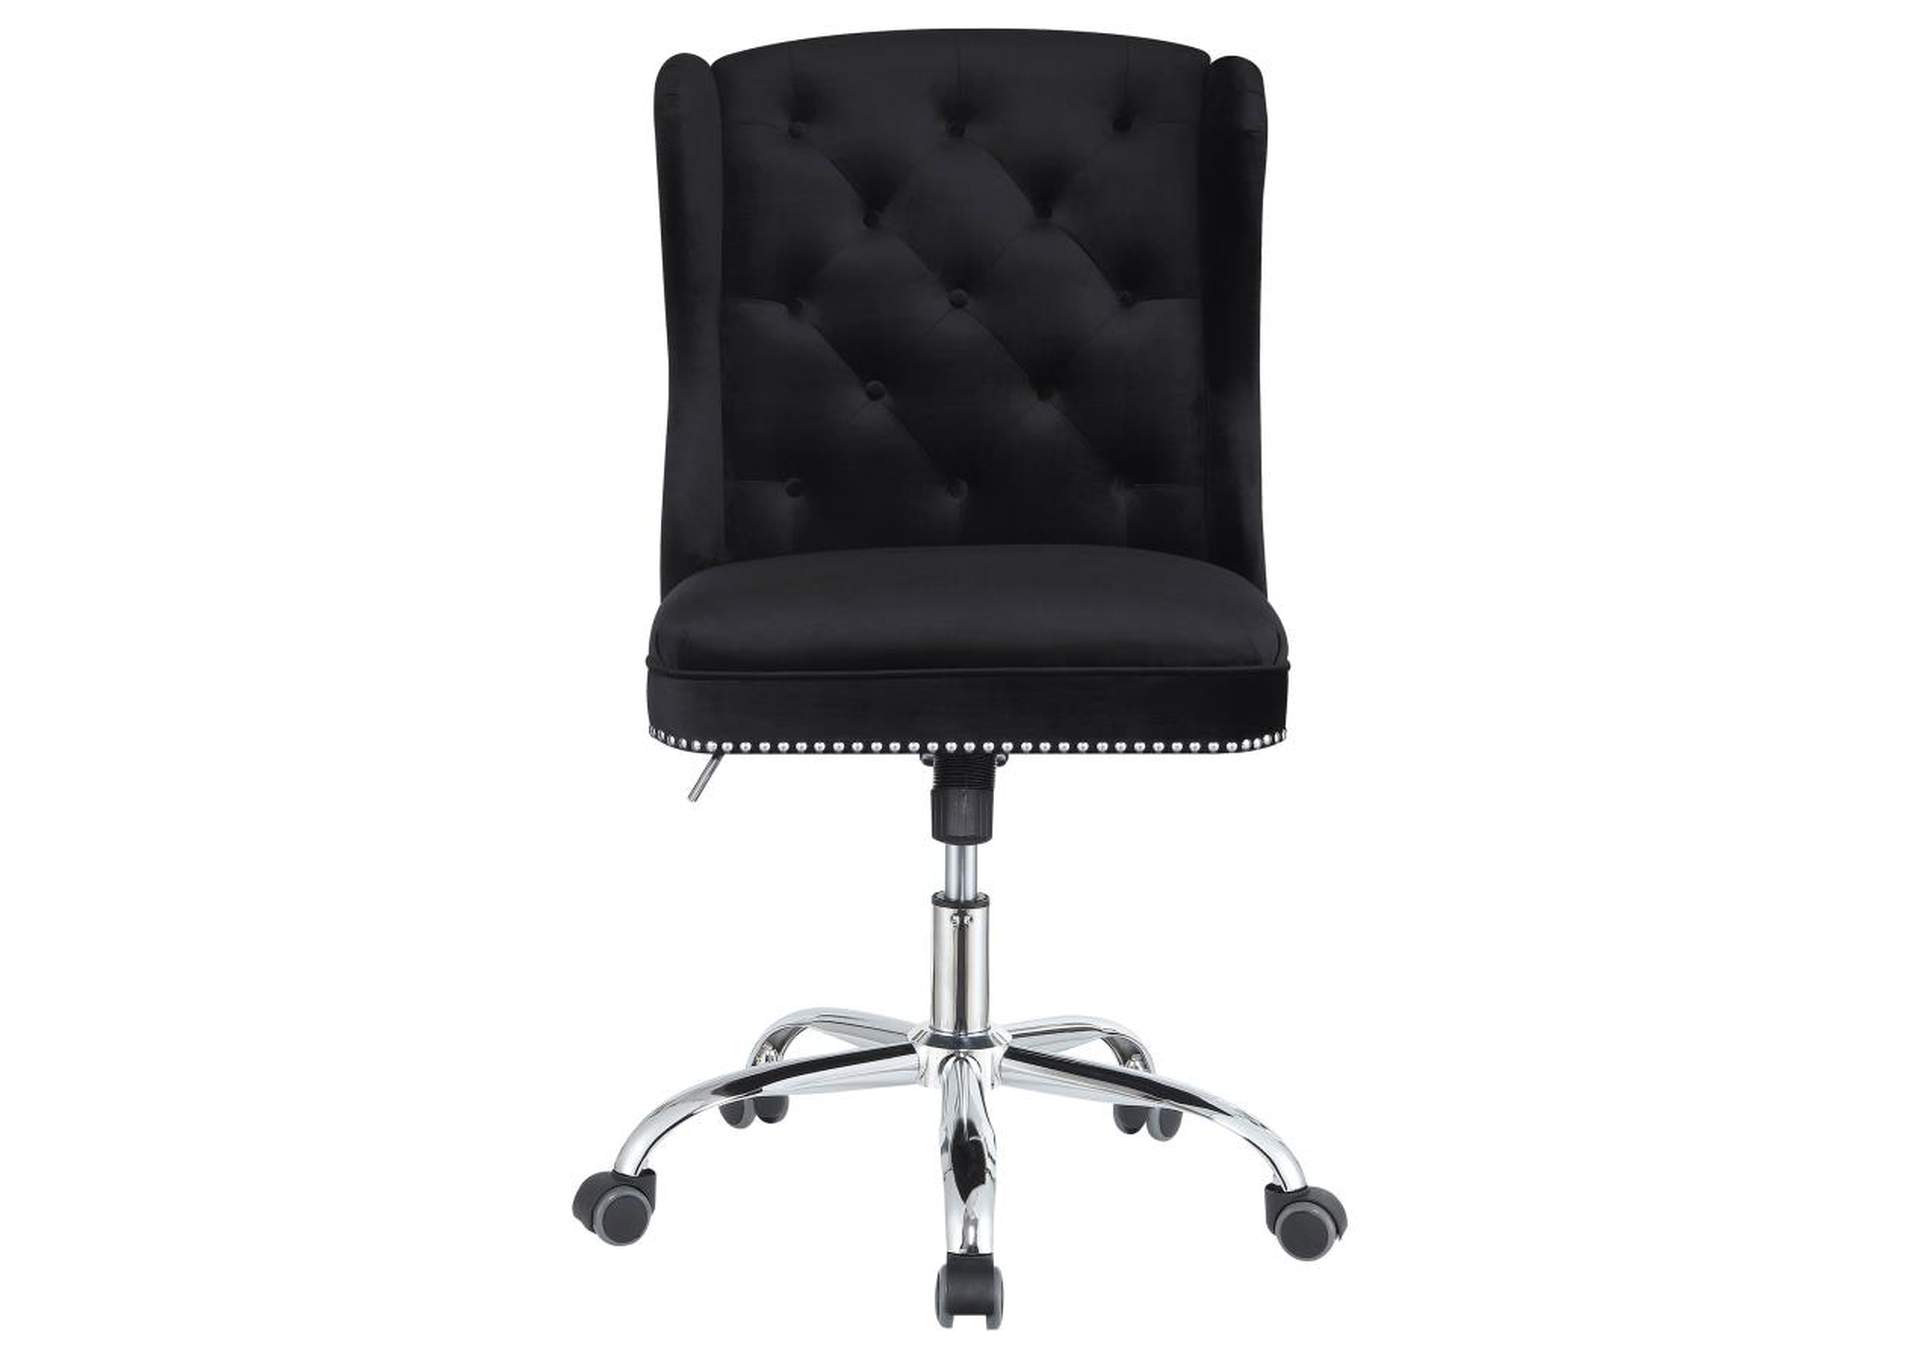 Julius Upholstered Tufted Office Chair Black And Chrome,Coaster Furniture